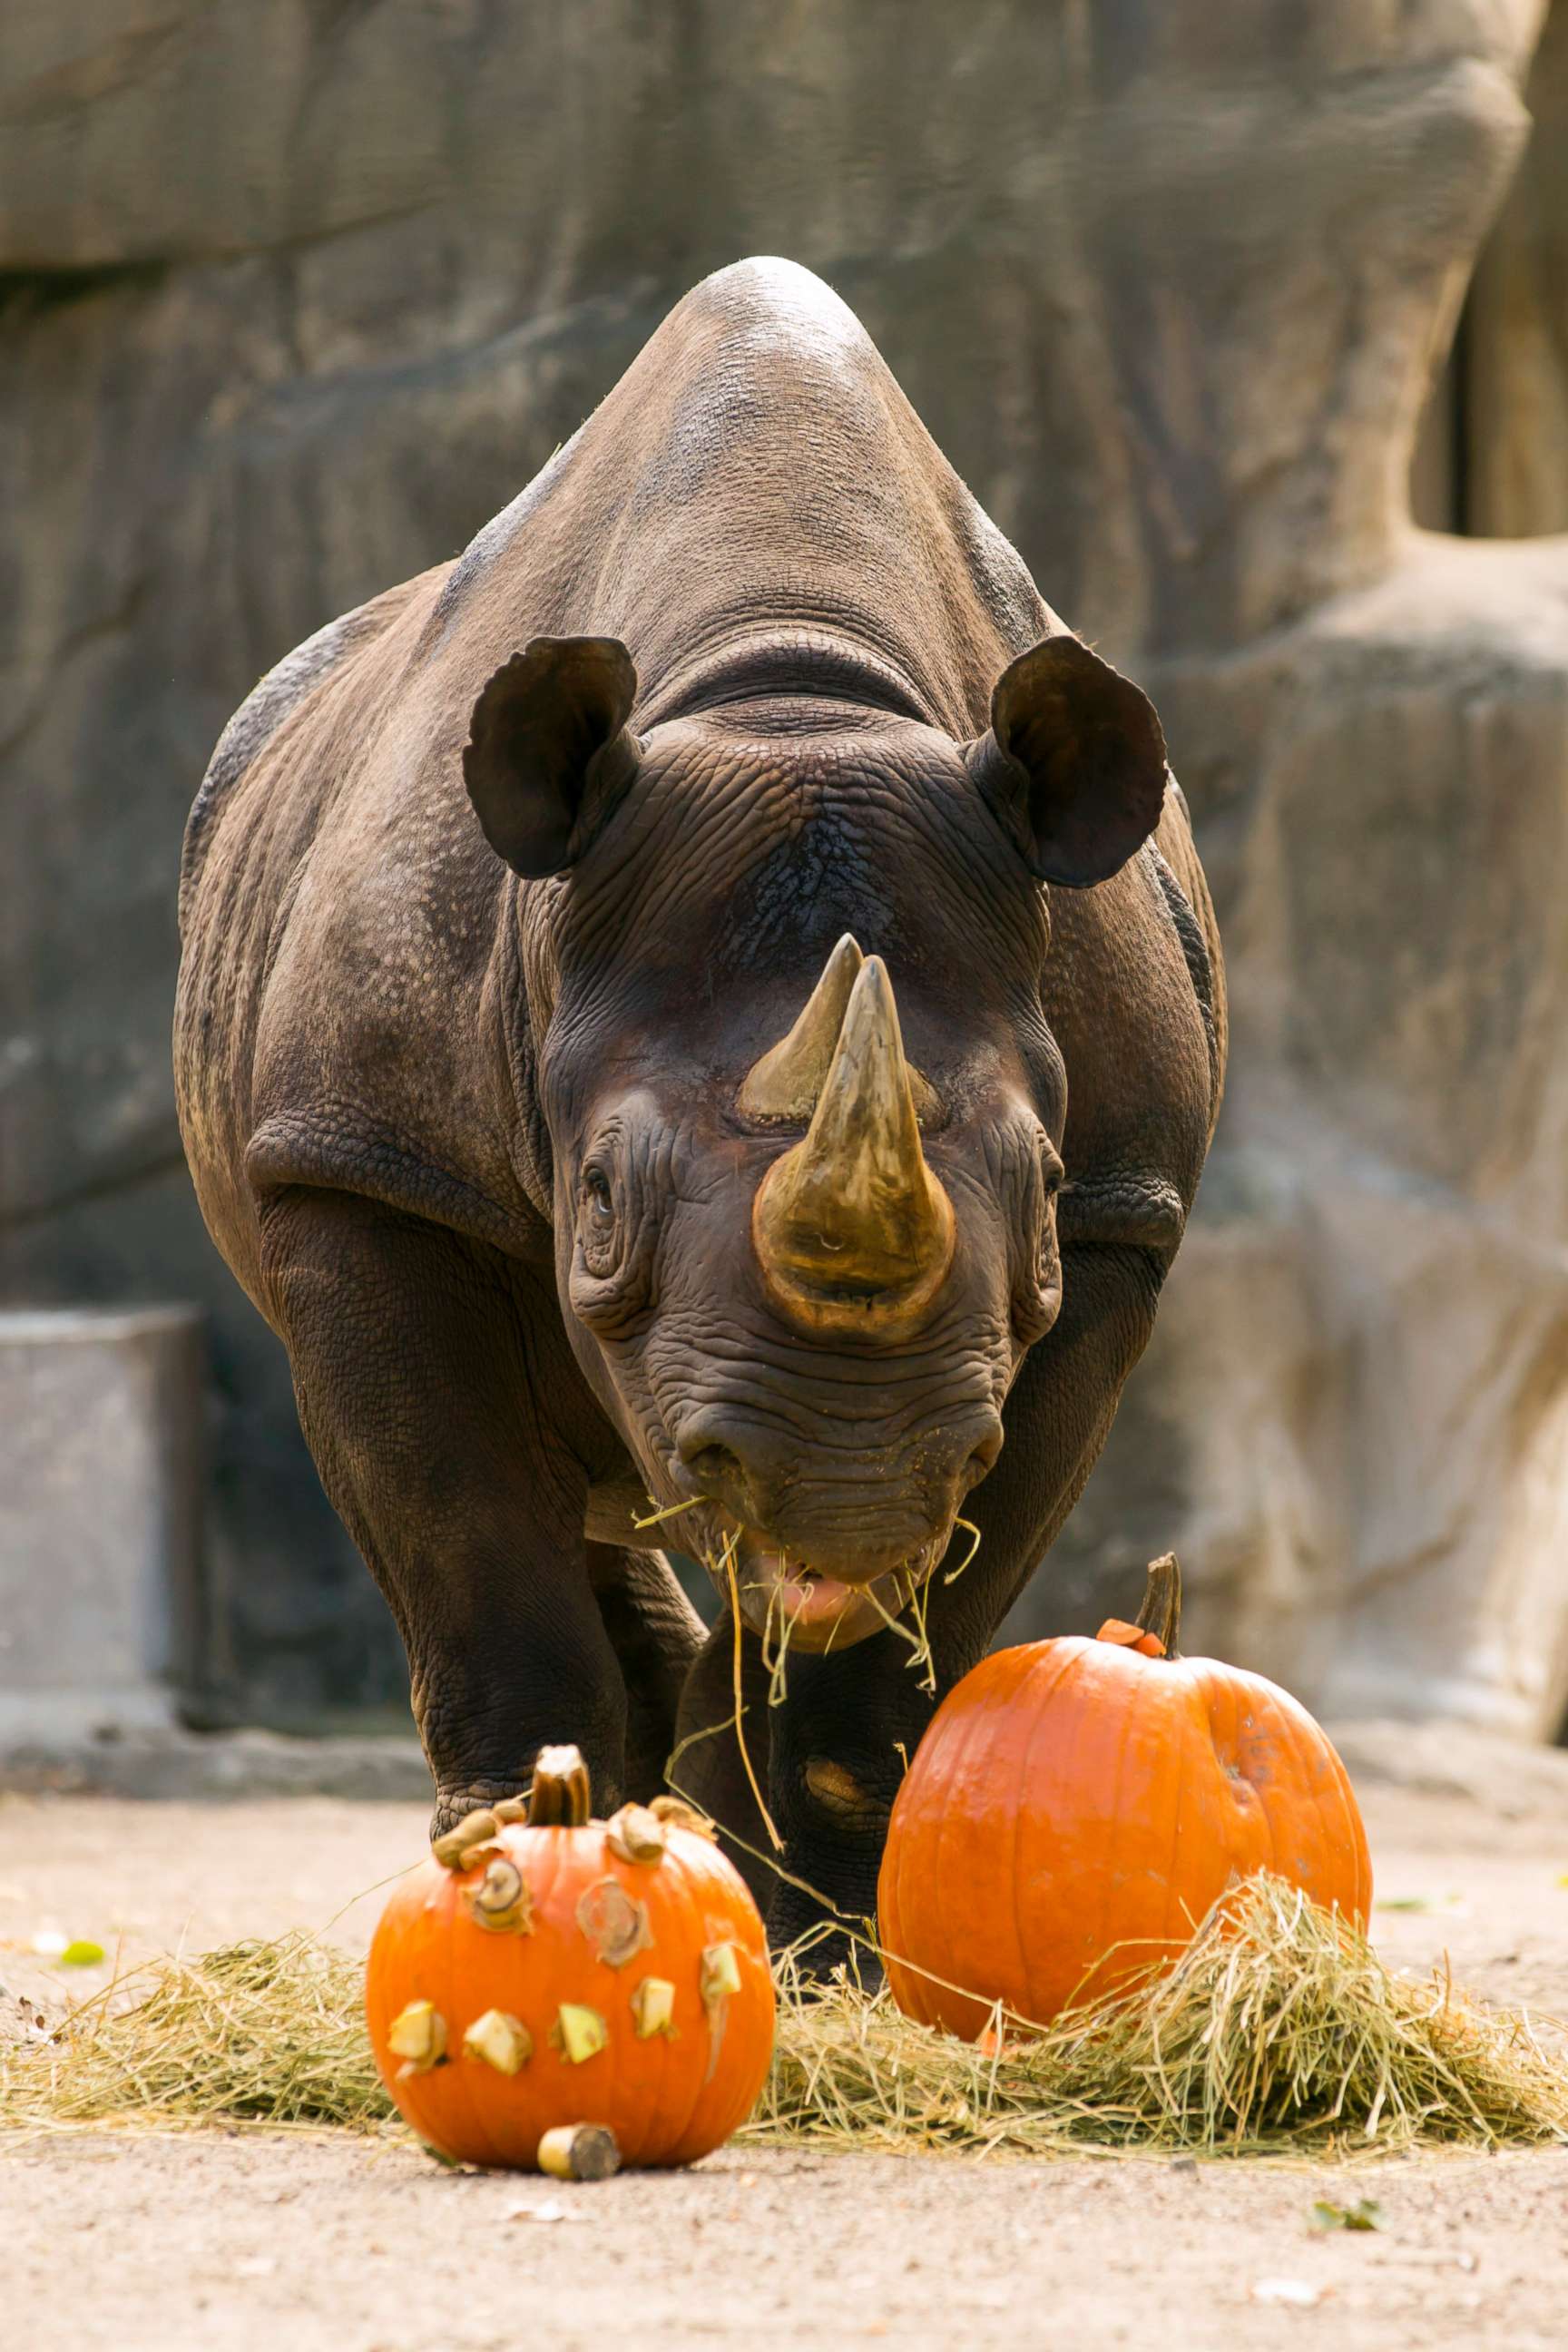 PHOTO: An eastern black rhino grazed pumpkins at the Lincoln Park Zoo in Chicago.